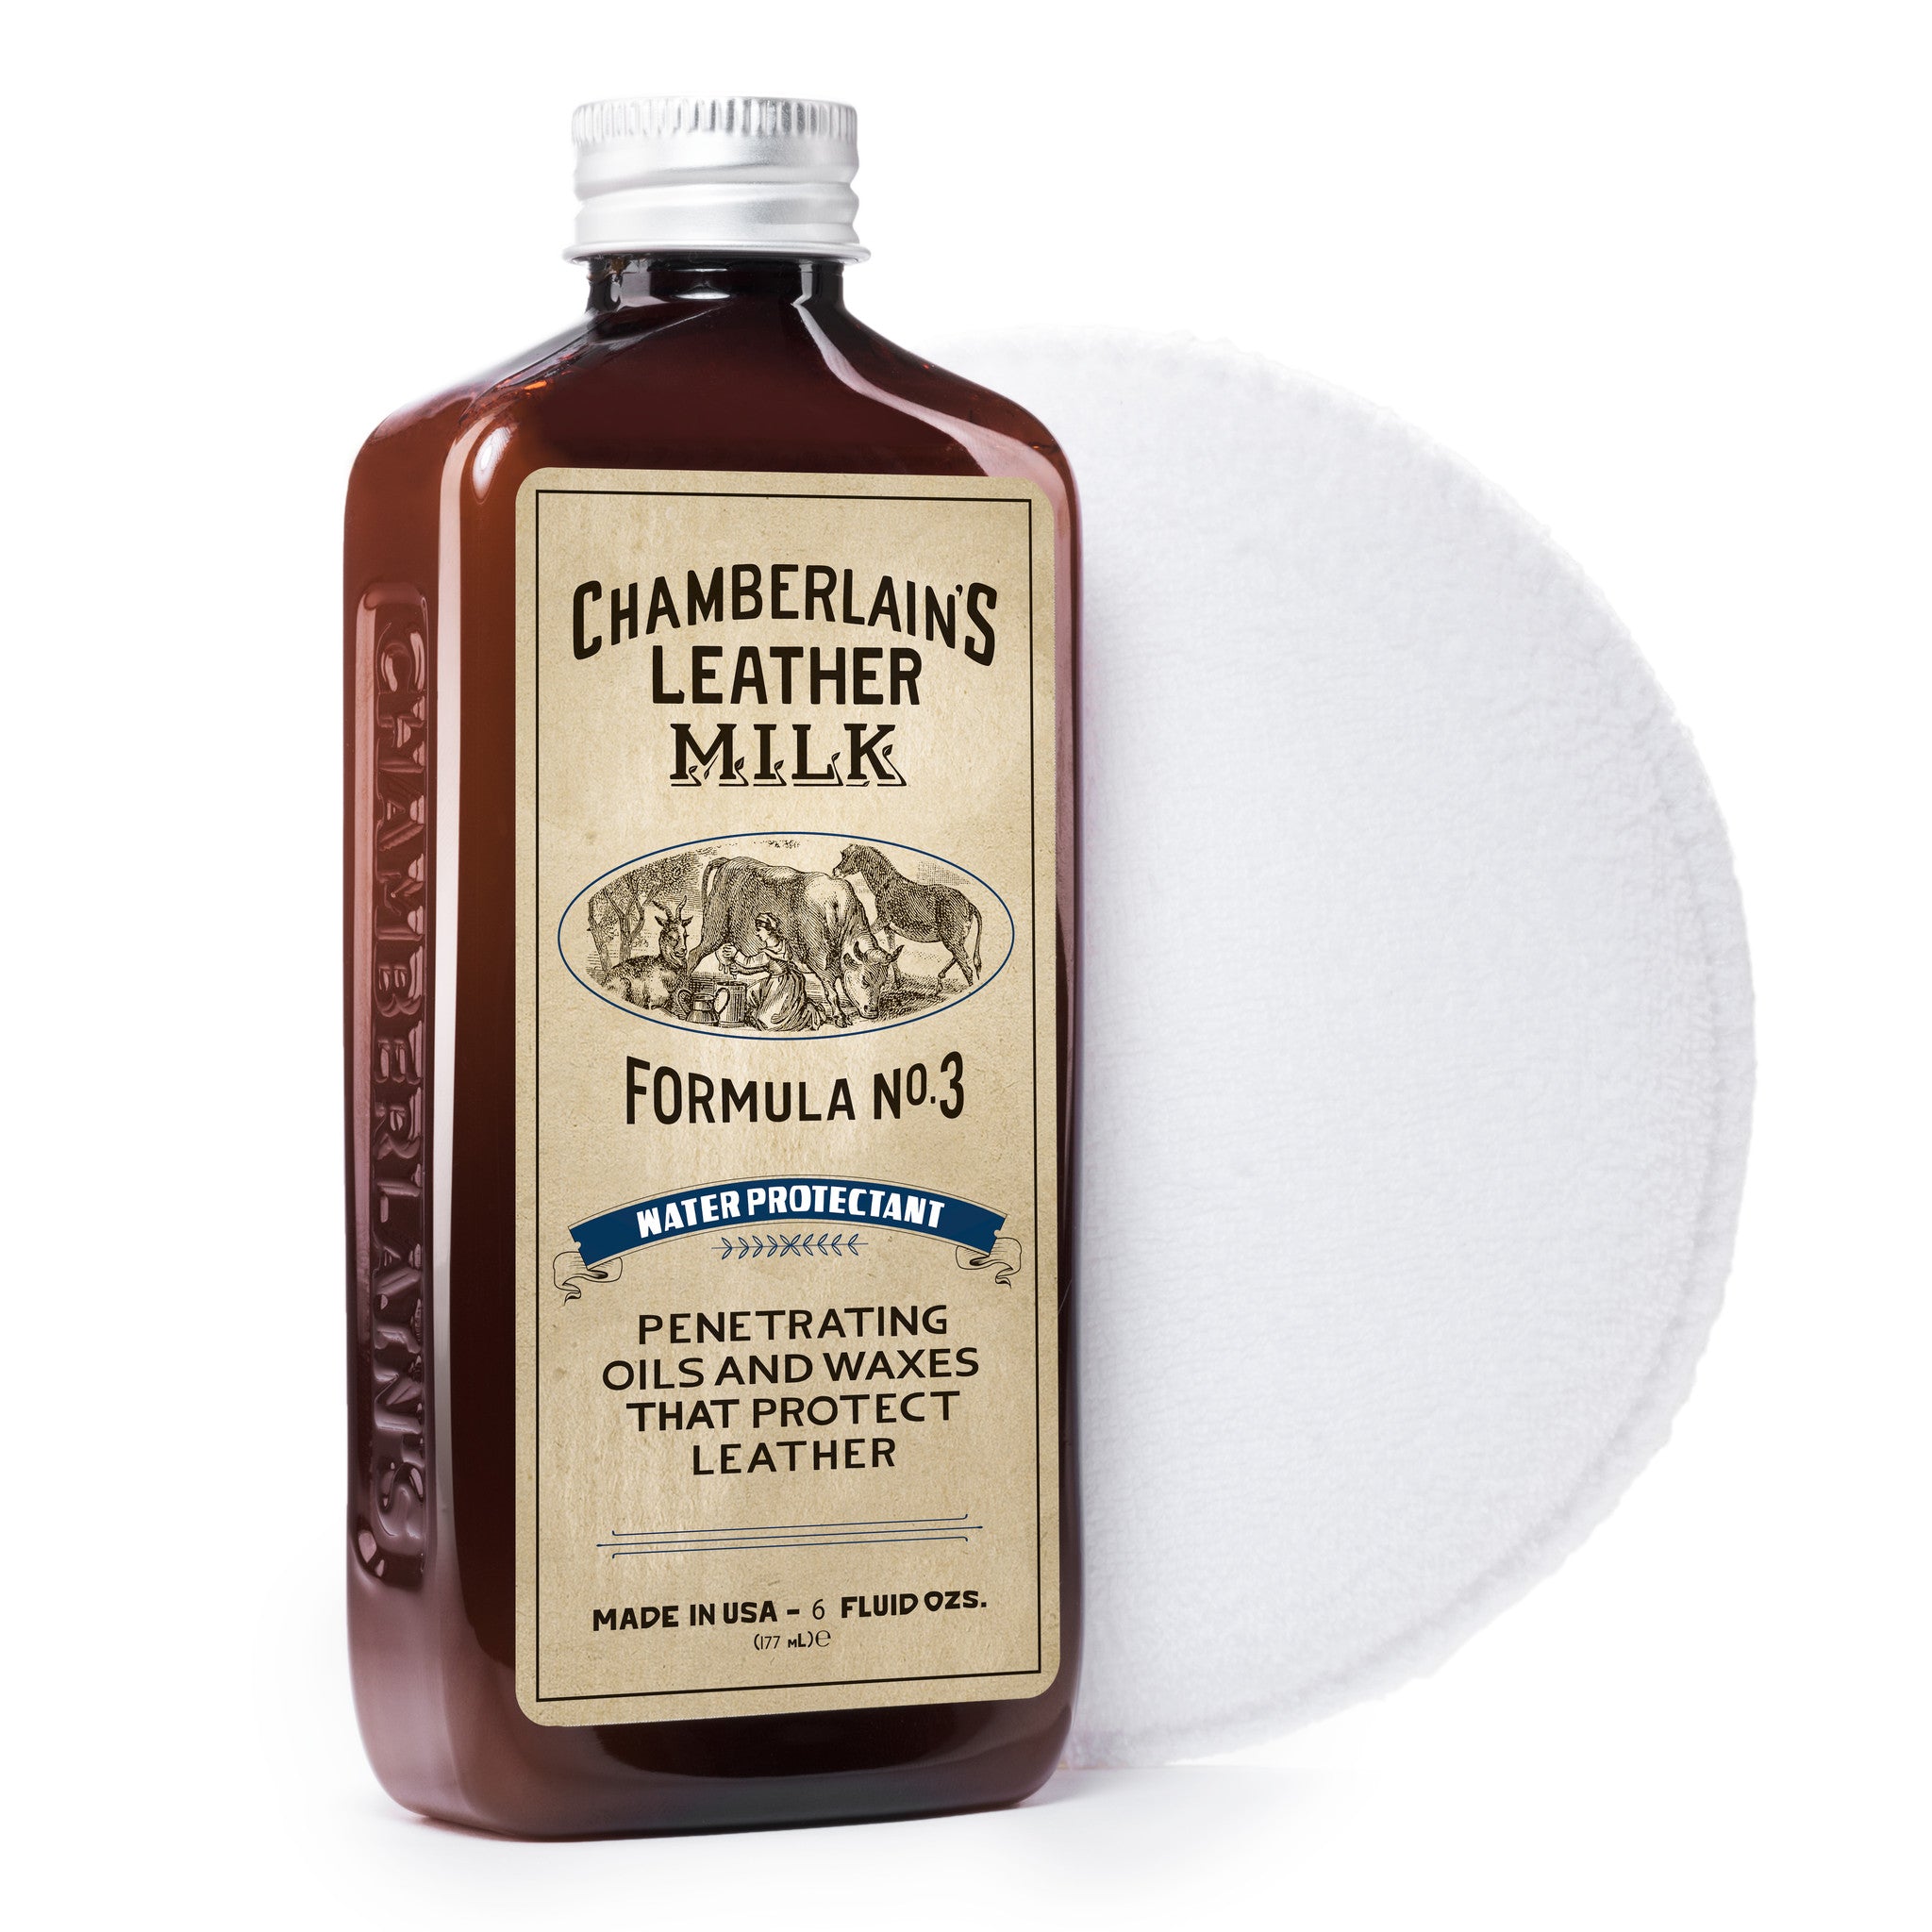 Water Protectant NO. 3 - Premium Leather Protector